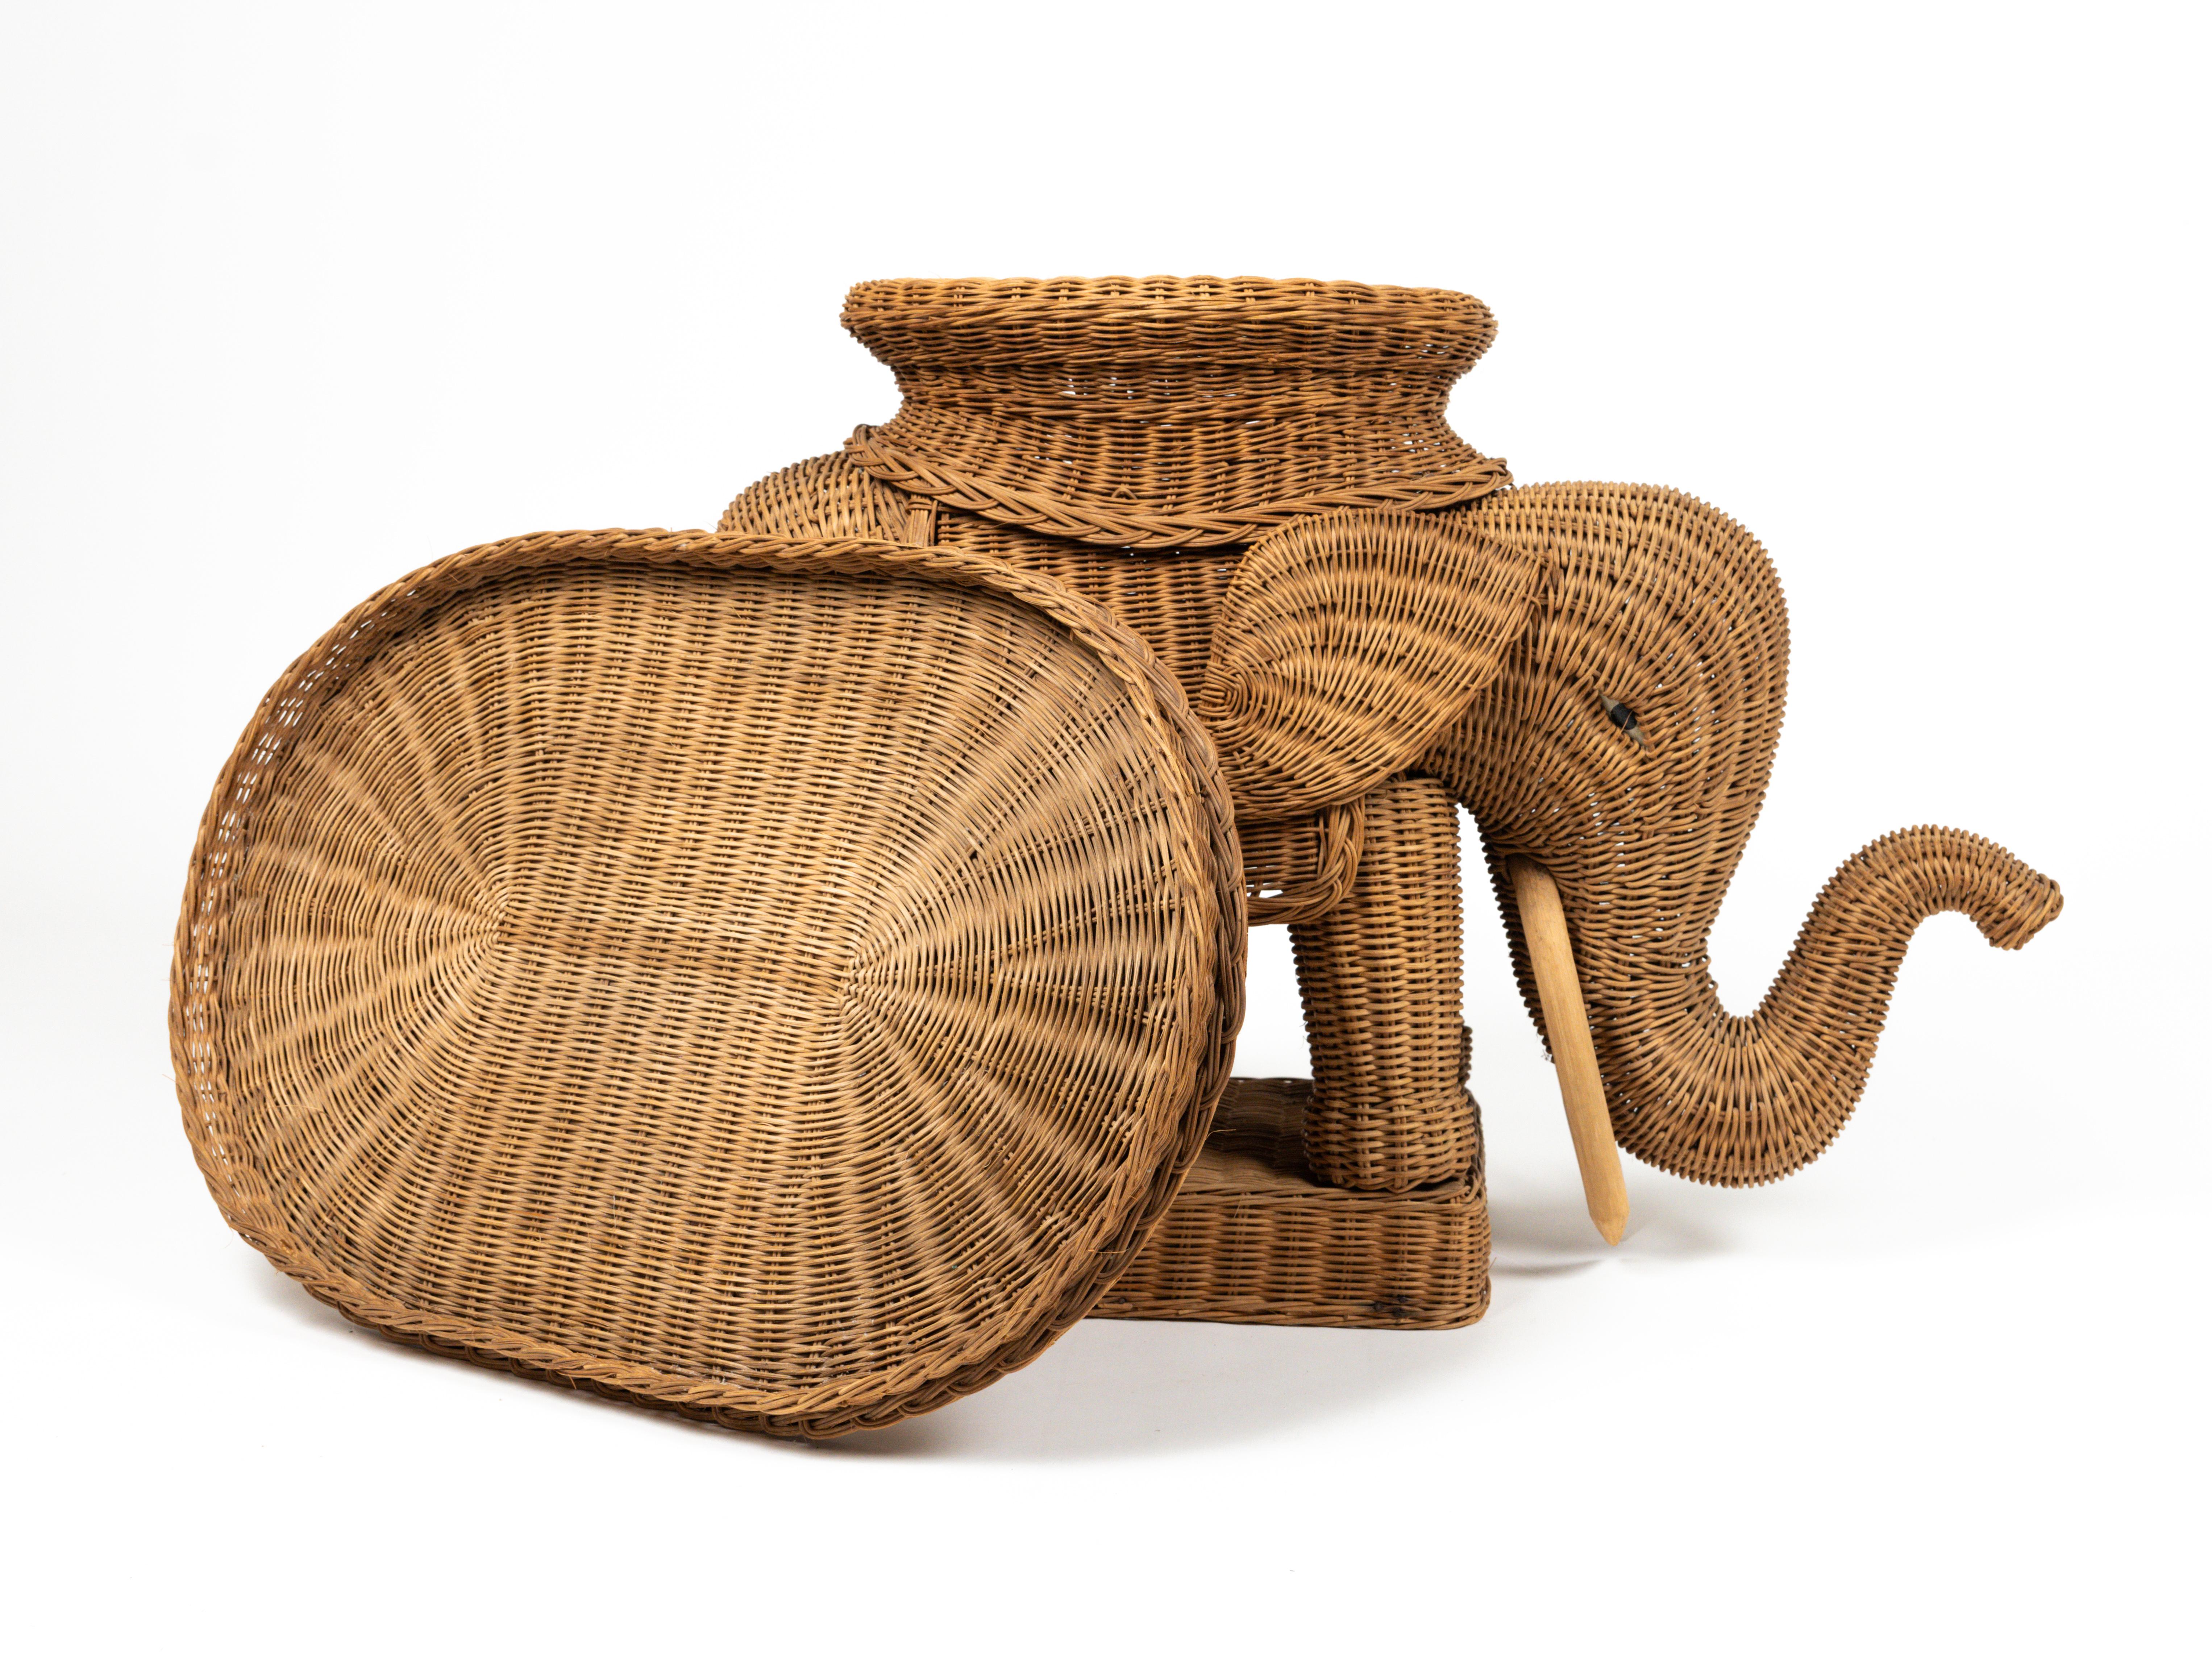 Rattan & Wicker Elephant Side Coffee Table Vivai Del Sud Style, Italy, 1960s In Good Condition For Sale In Rome, IT